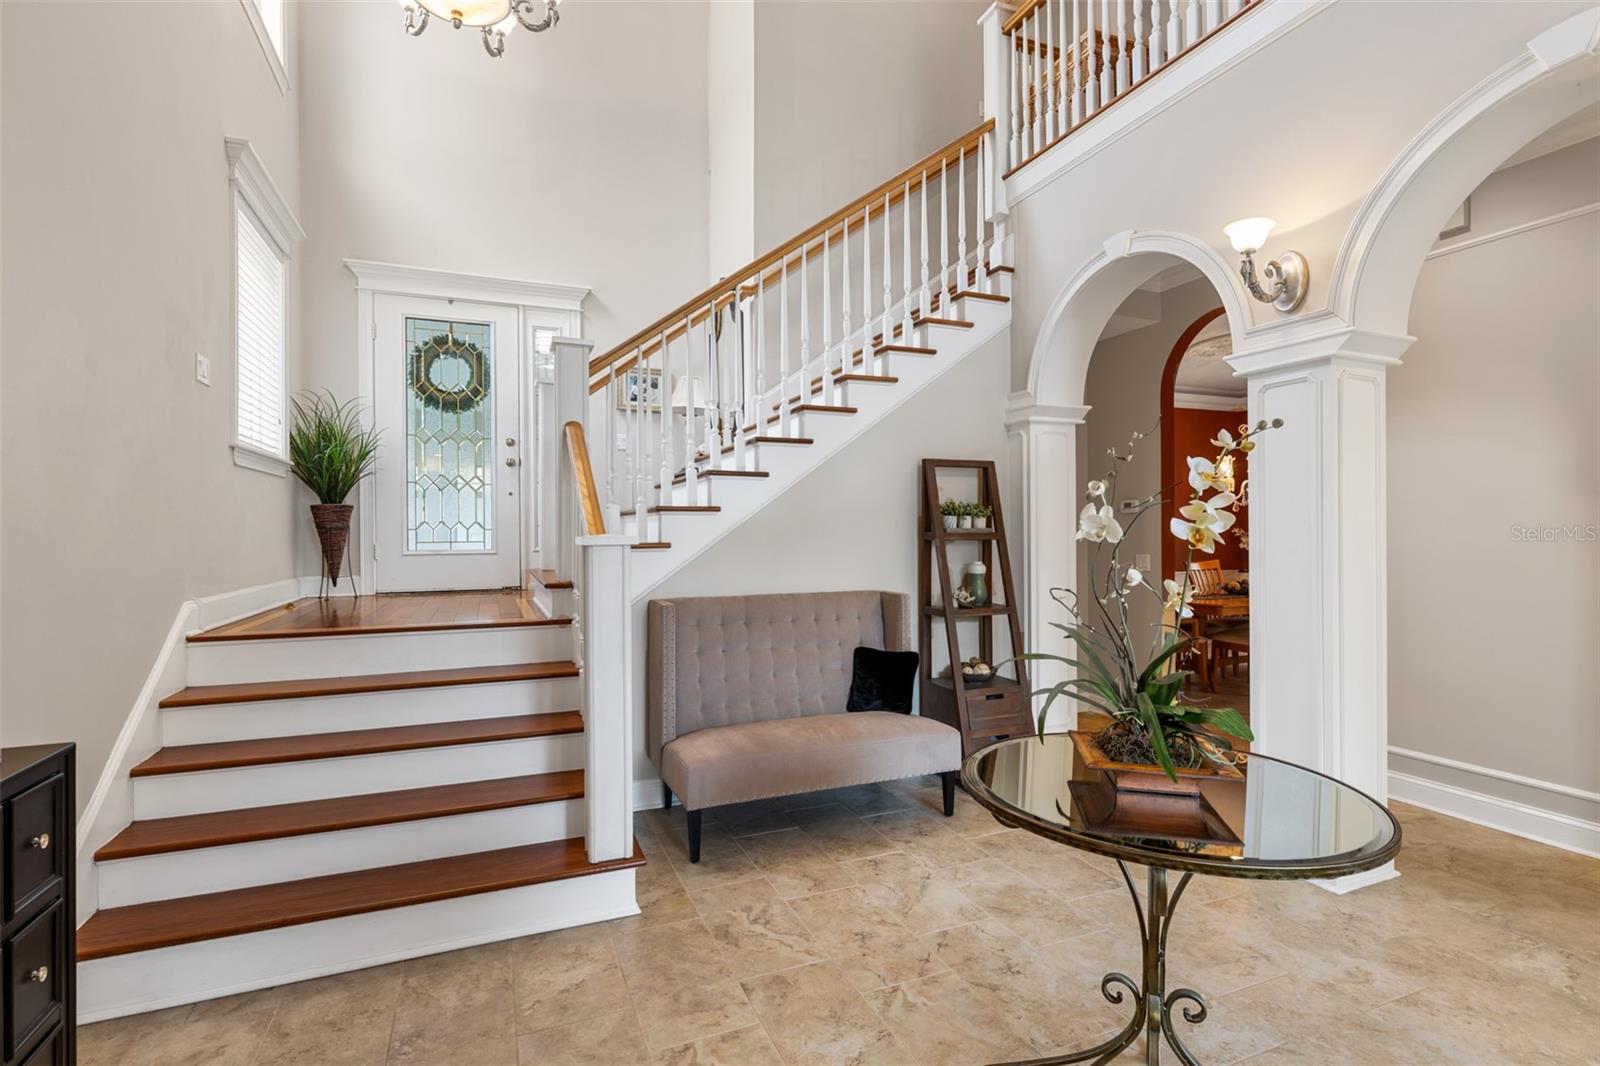 Beautiful entry, custom wood arches, and crown molding.